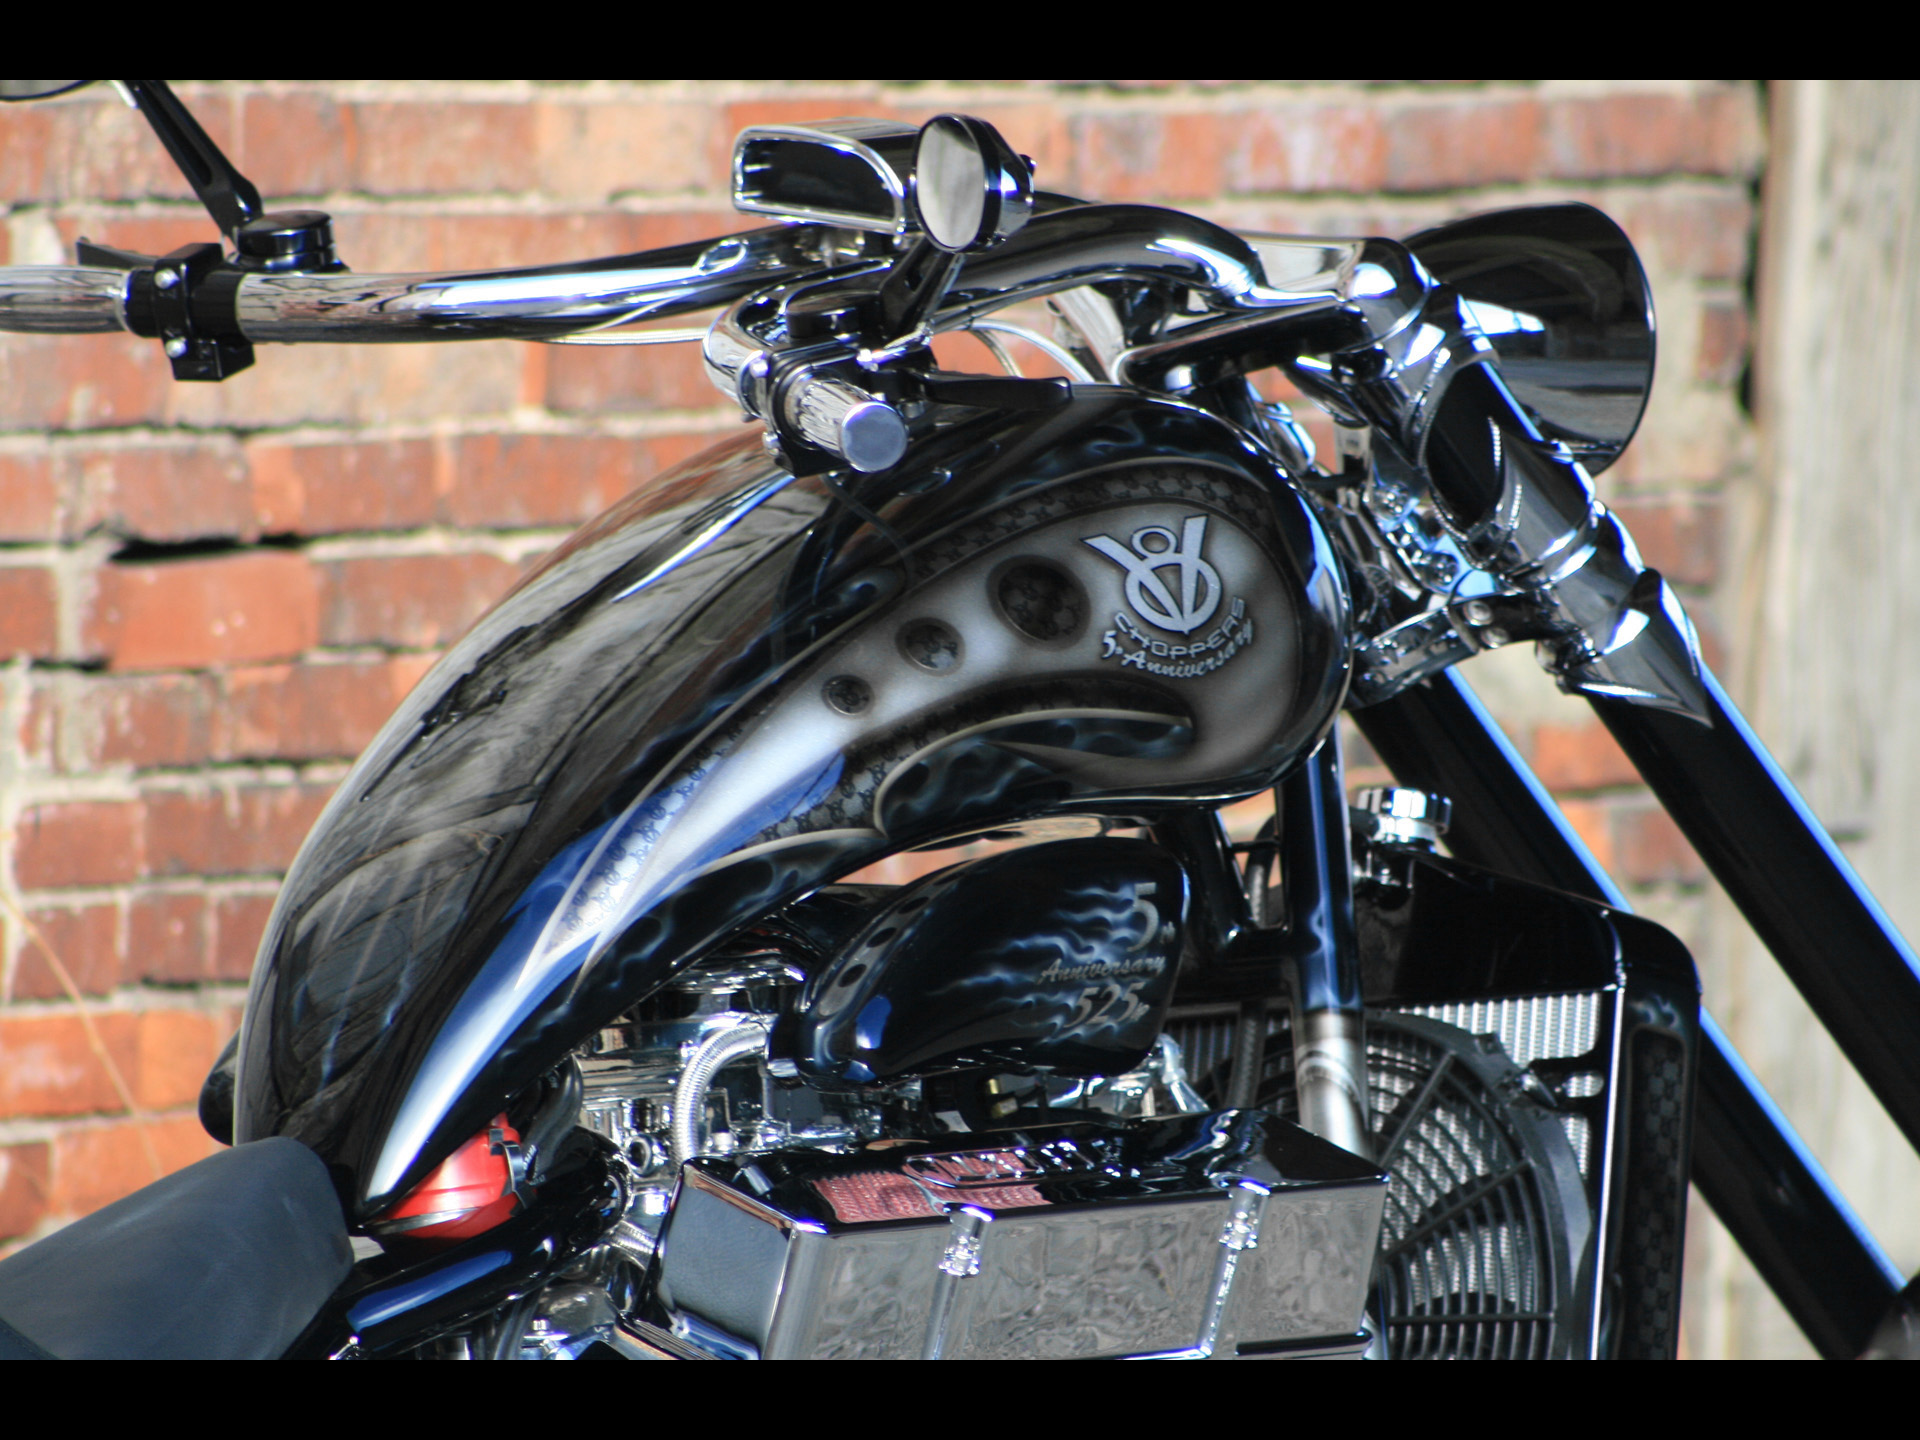 2011, V8 choppers, C series, Section, V 8, Chopper, Choppers, Engine, Engines, Muscle, Hot, Rod, Rods Wallpaper